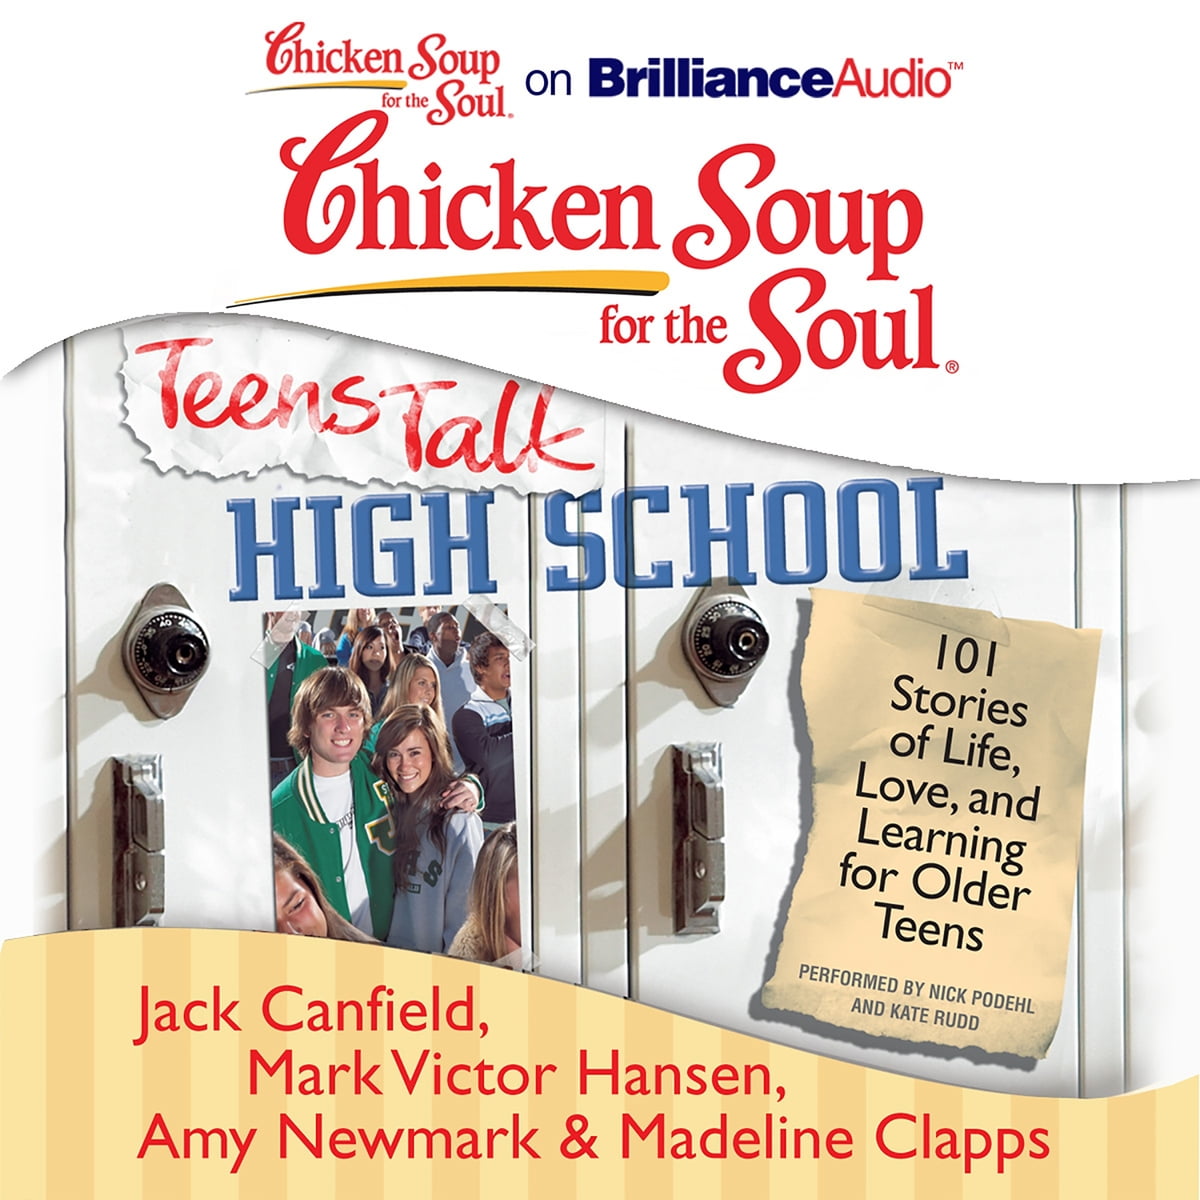 Chicken soup for the soul : teens talk high school : 101 stories of life, love, and learning for older teens